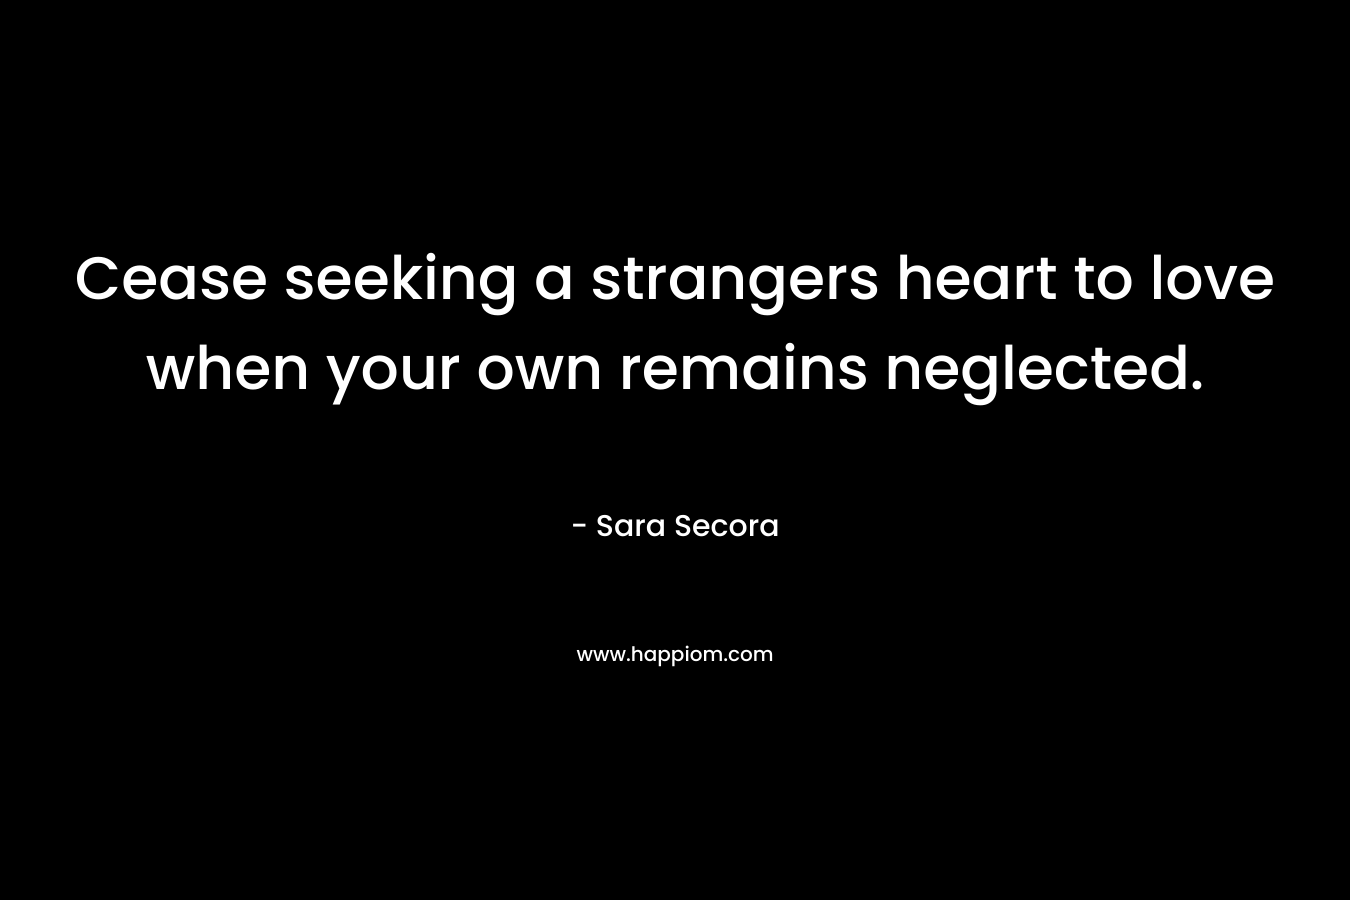 Cease seeking a strangers heart to love when your own remains neglected.